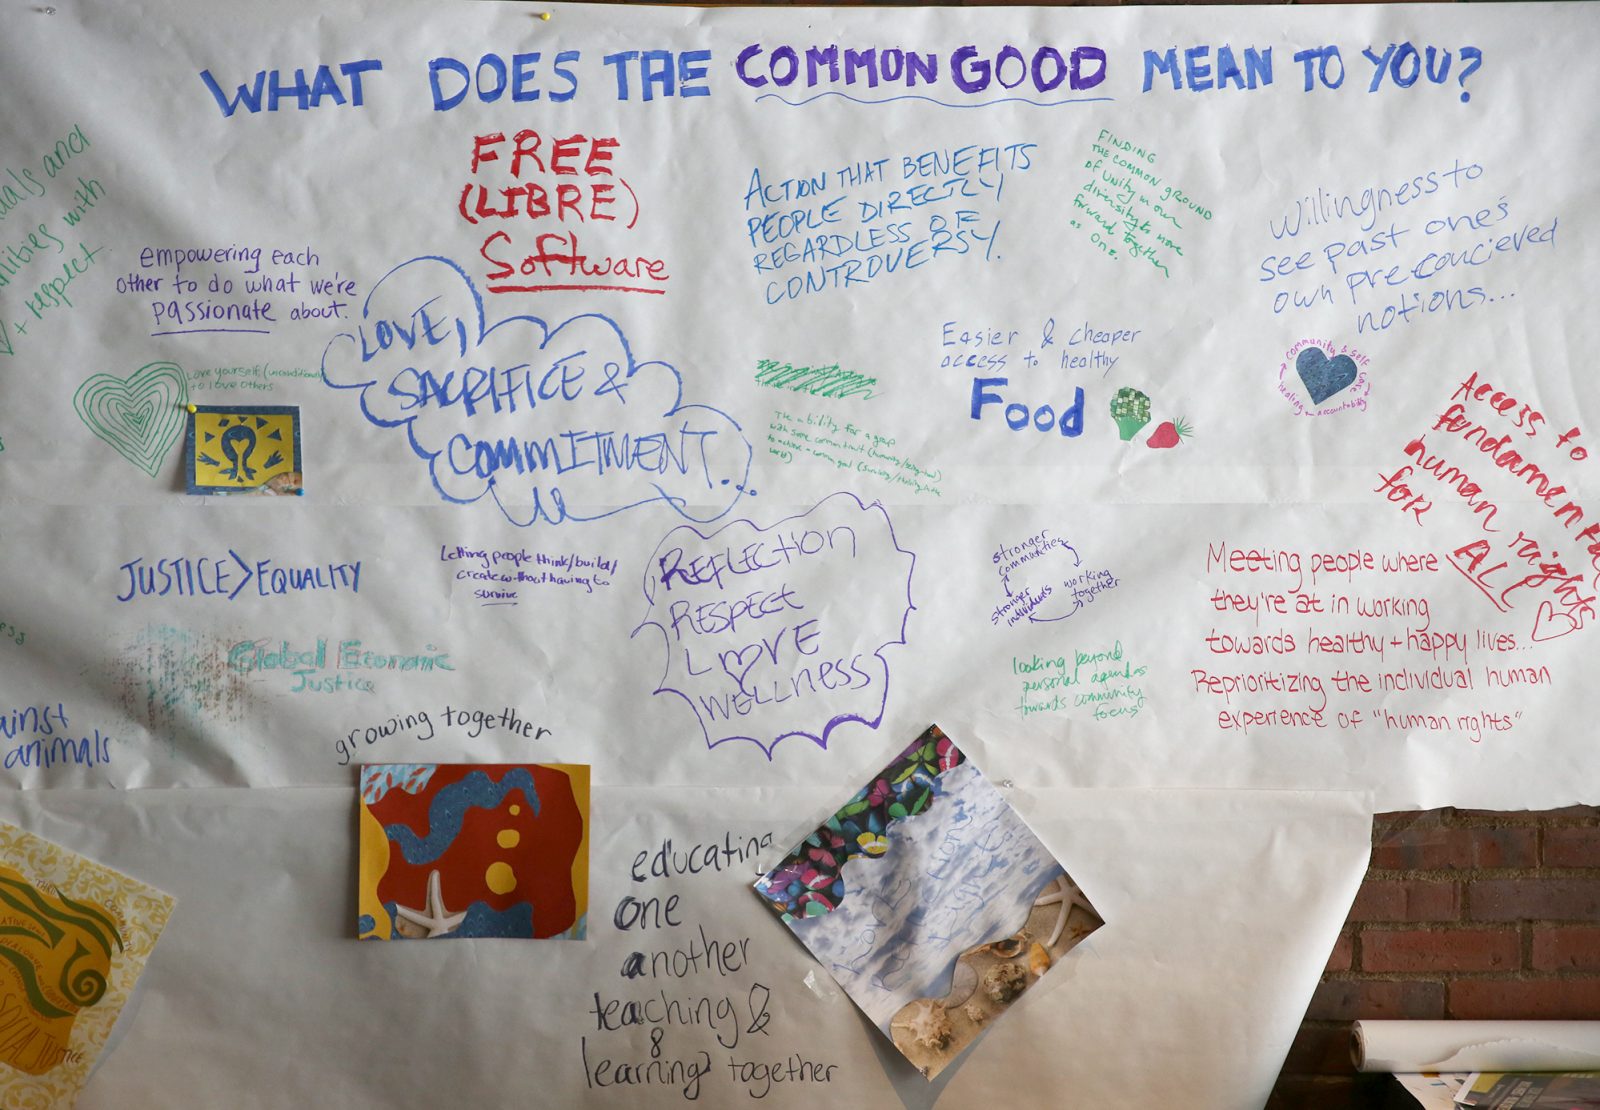 Mural and collage of what the common good means to our community members